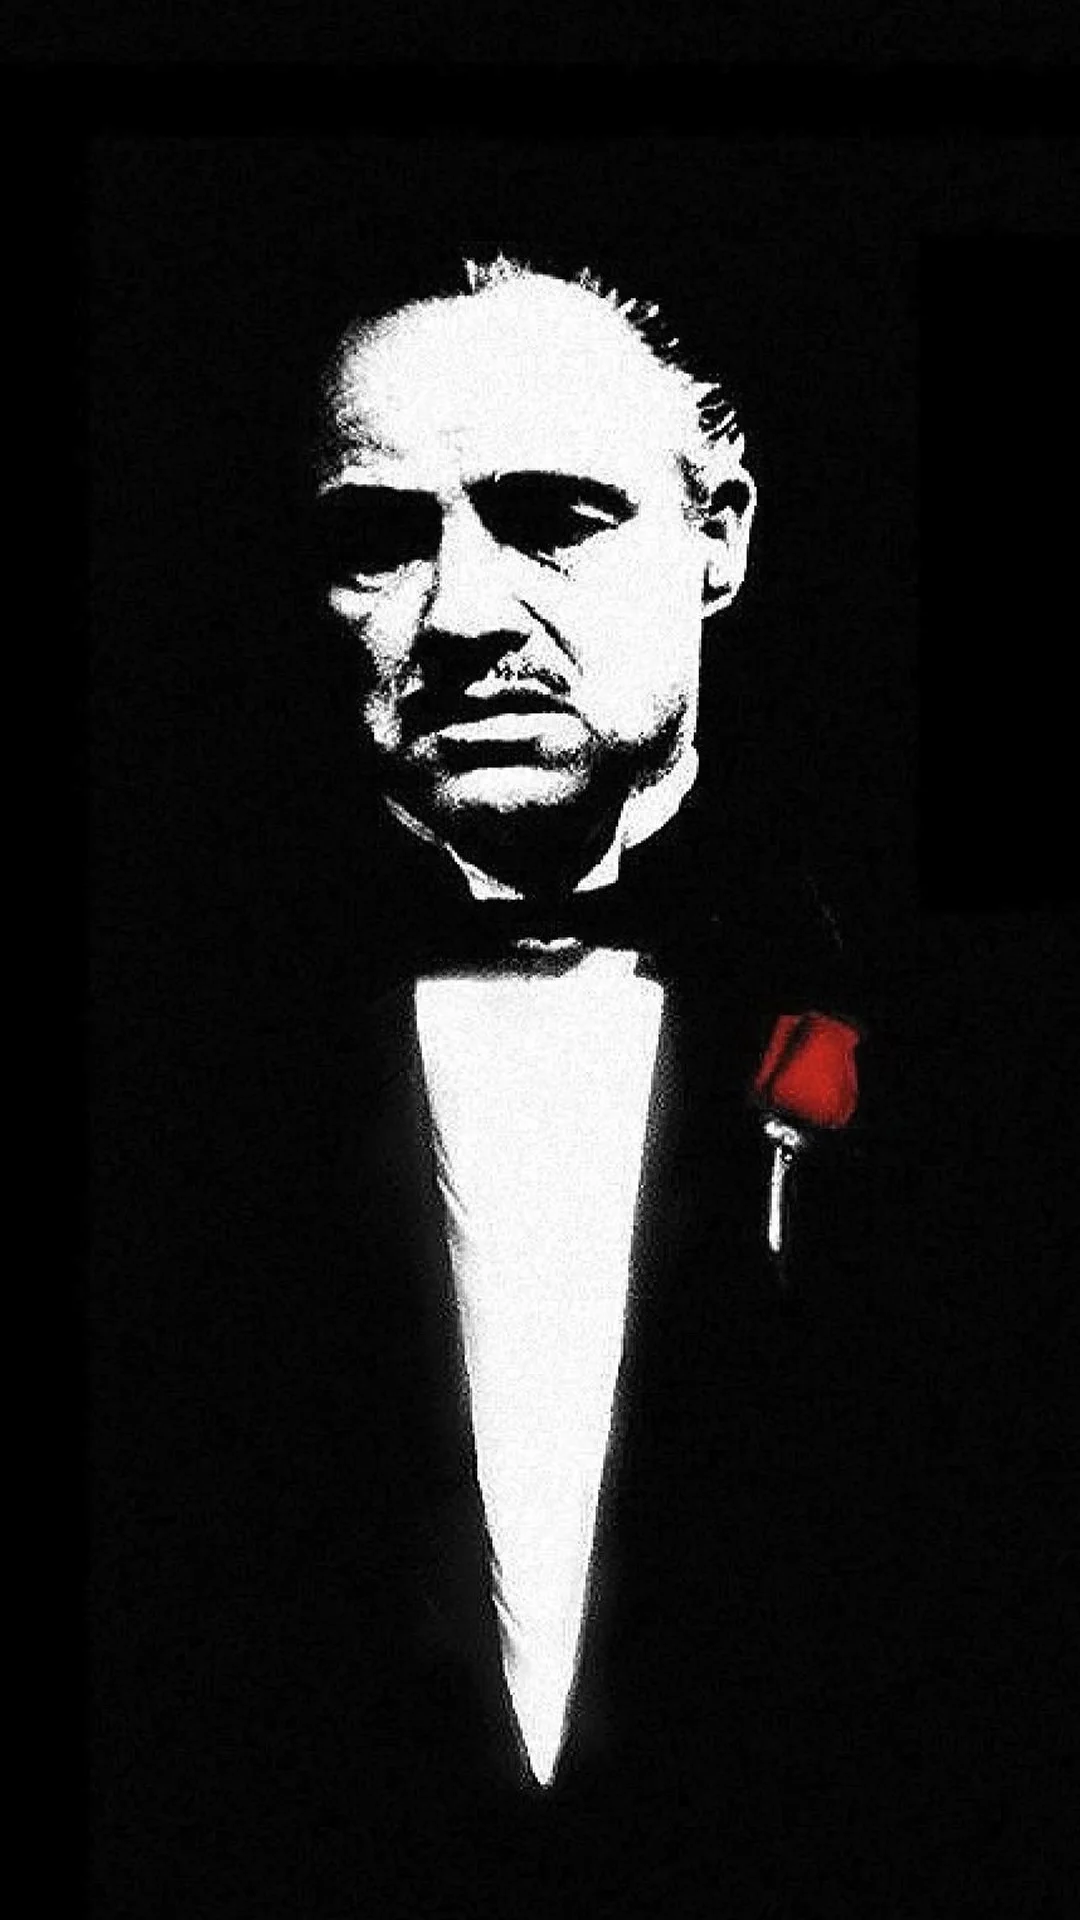 The Godfather #iPhone #wallpaper